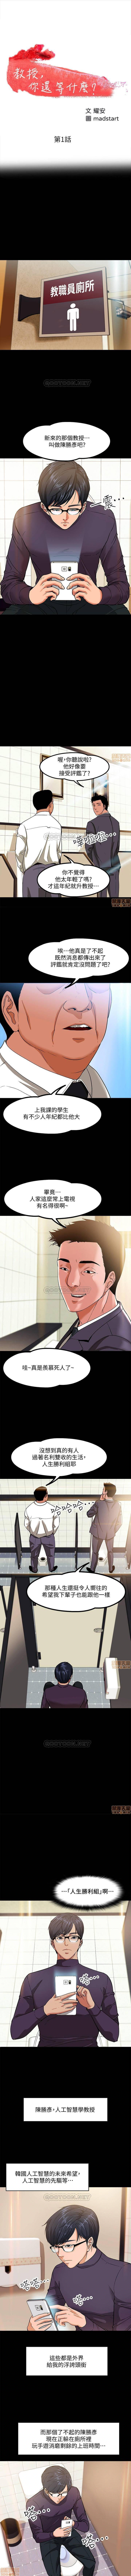 PROFESSOR, ARE YOU JUST GOING TO LOOK AT ME? | DESIRE SWAMP | 教授，你還等什麼? Ch. 1Manhwa 2